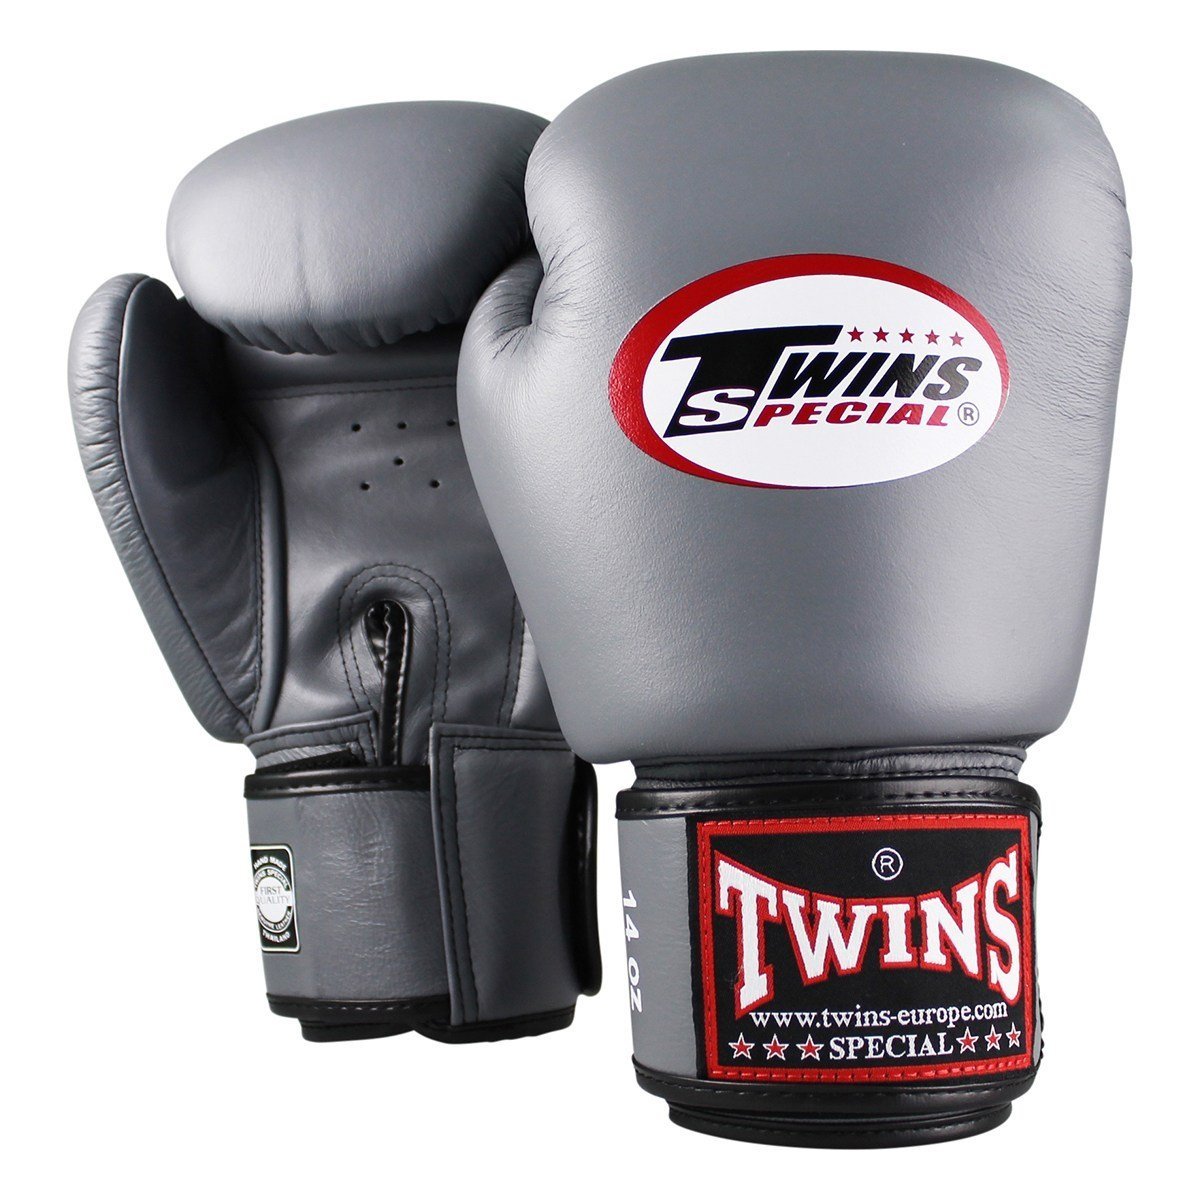 Twins Special BGVL3 SILVER BOXING GLOVES